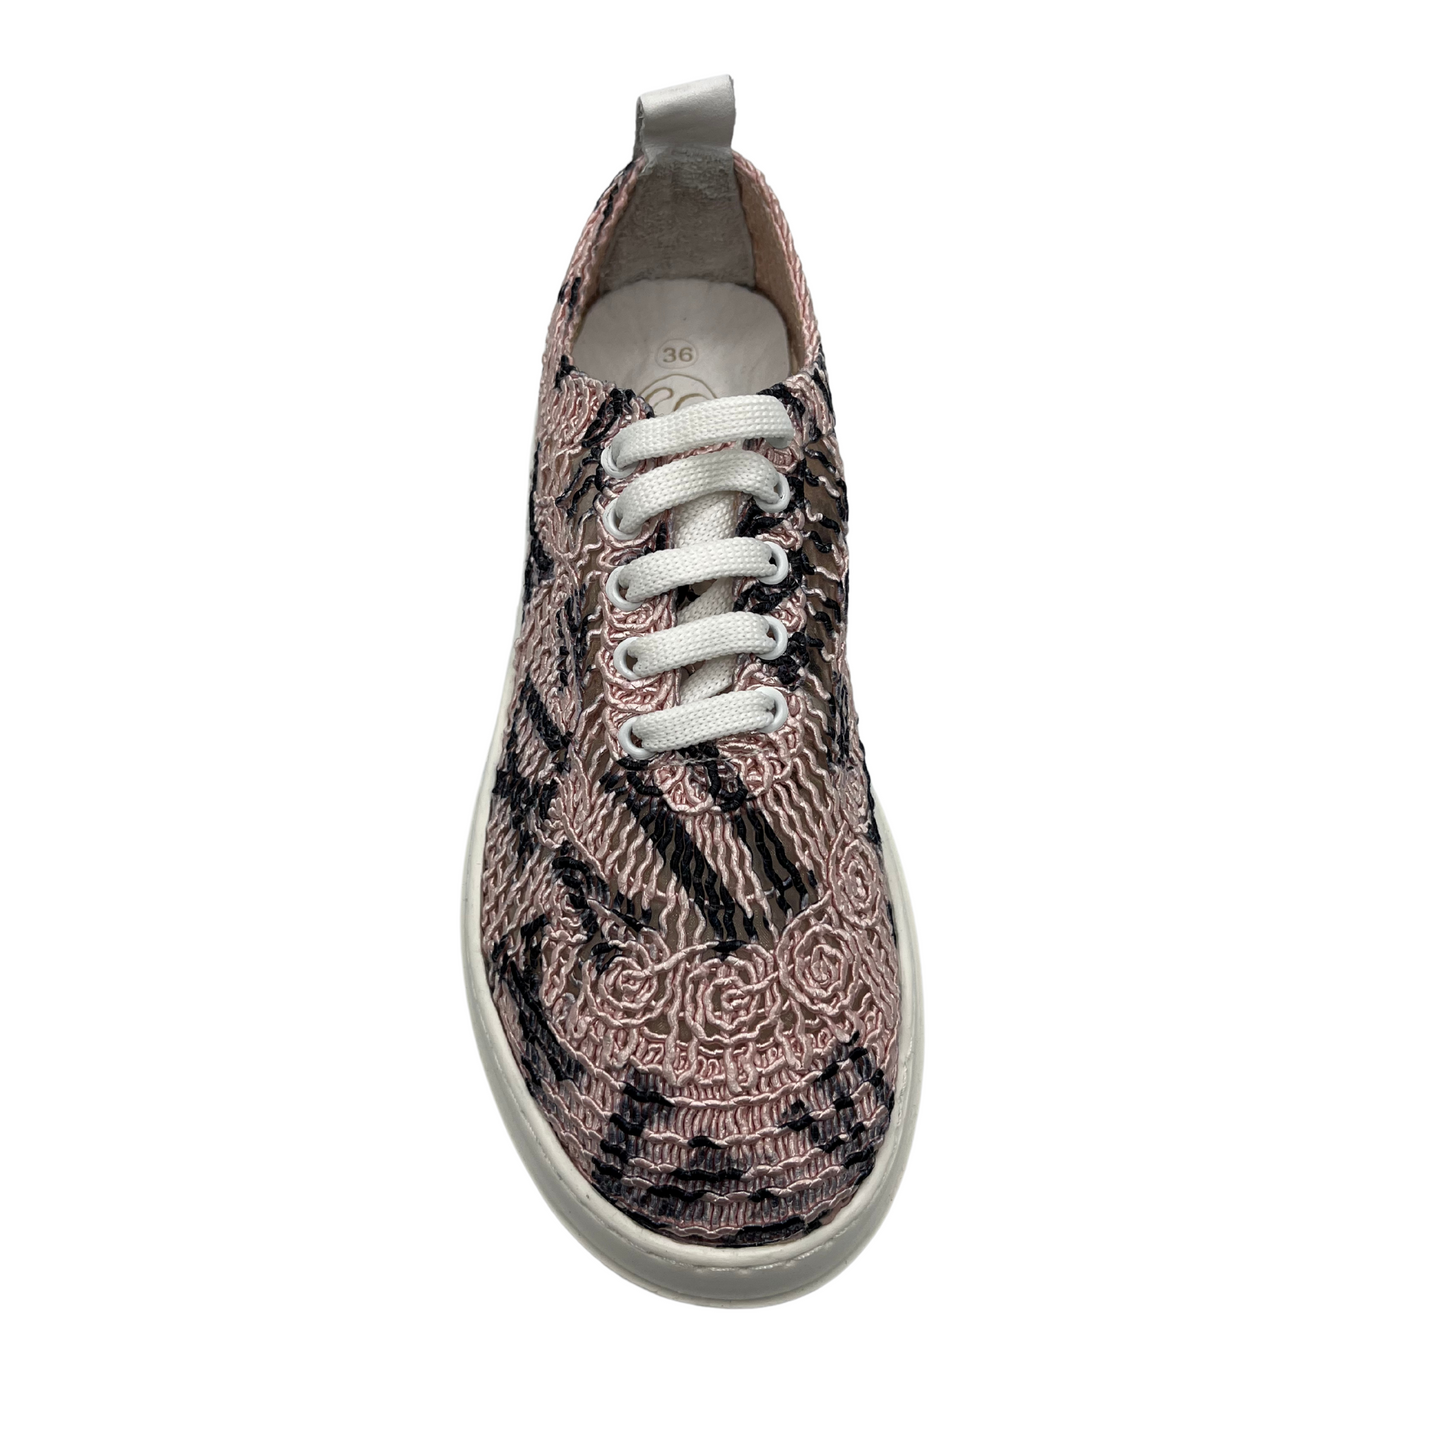 Top view of pink and black mesh sneaker with ultralight white platform sole with white laces.